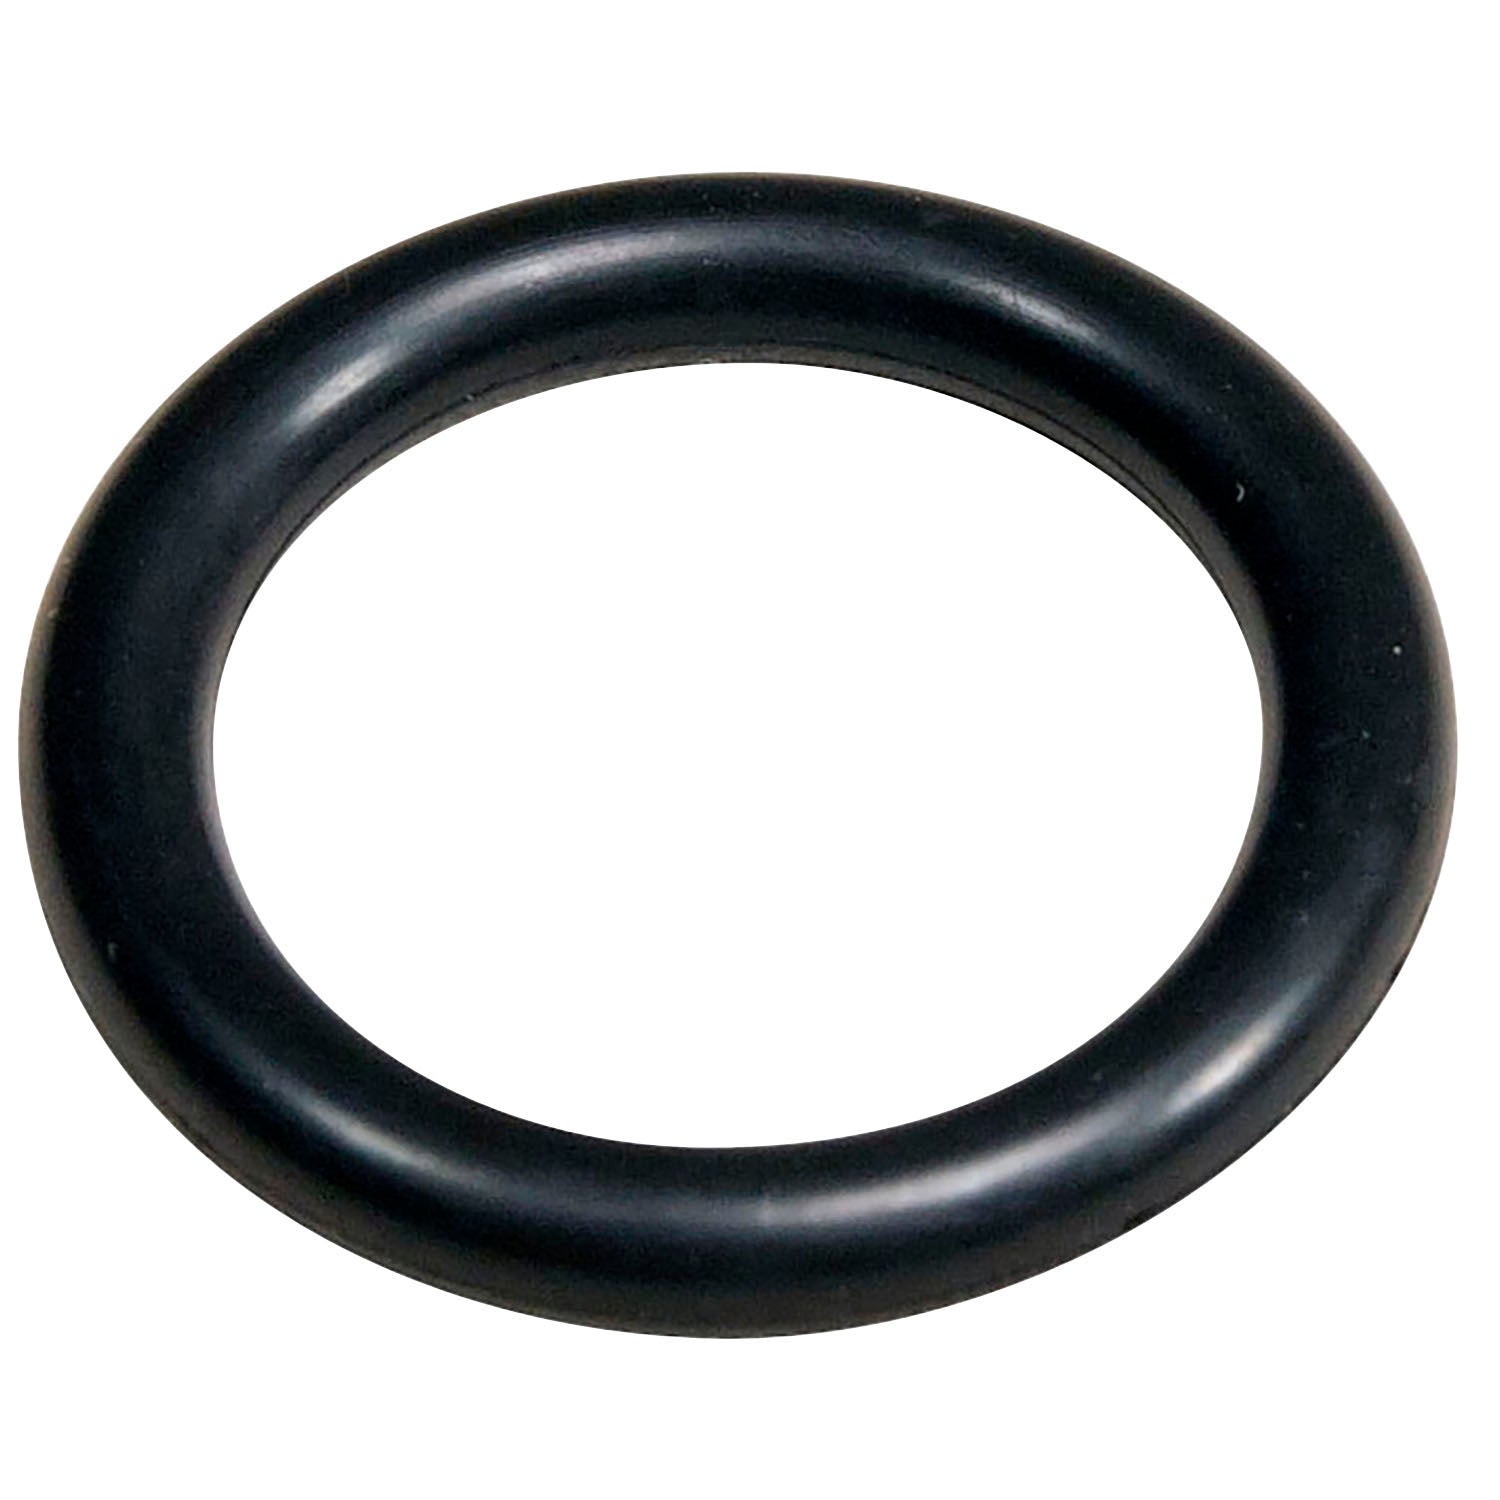 Welch 304802 REPLACEMENT VITON O-RING NW 25